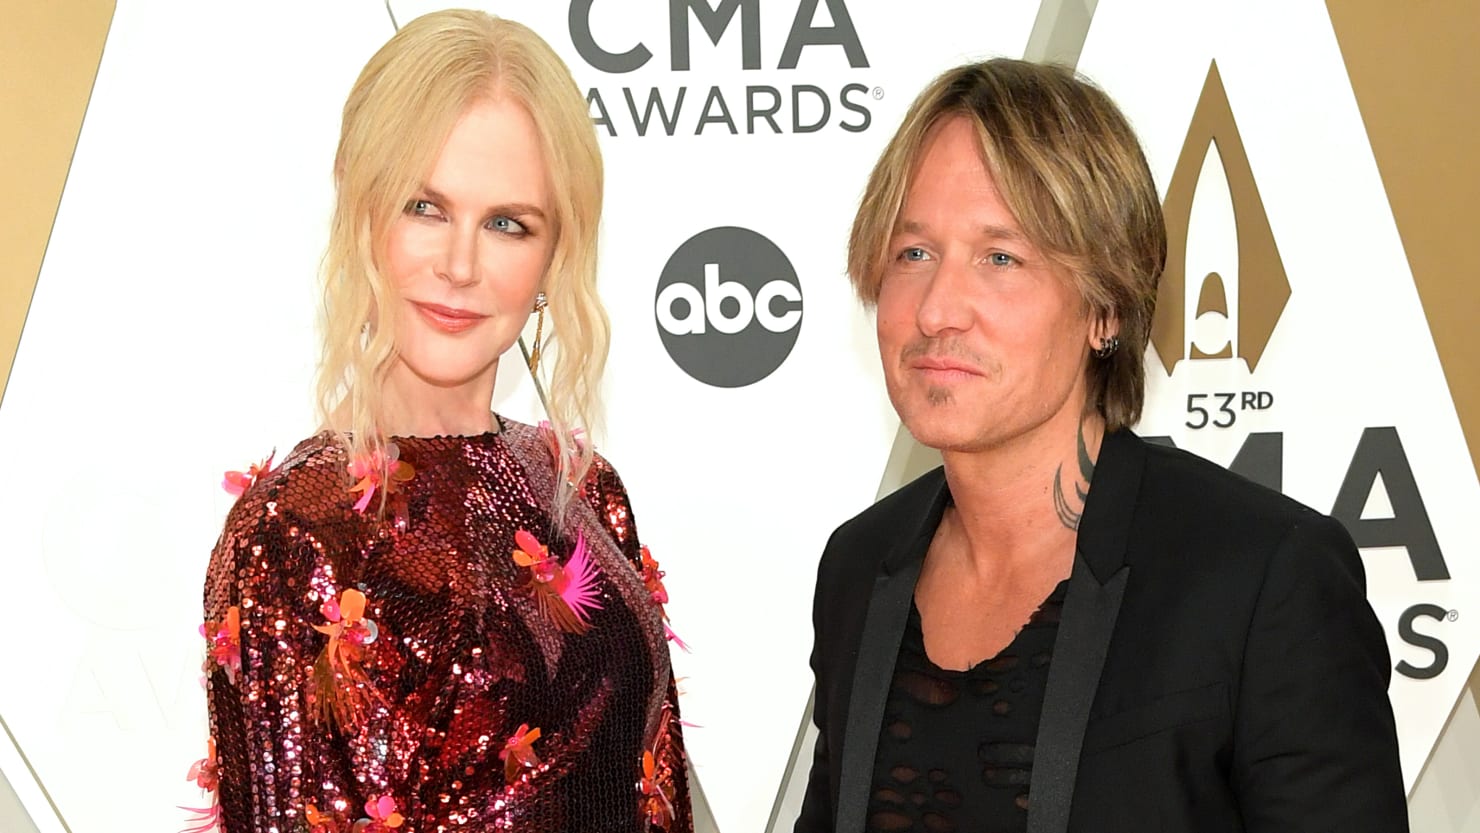 Police officers named after Nicole Kidman, Keith Urban give a wild standing ovation at the opera